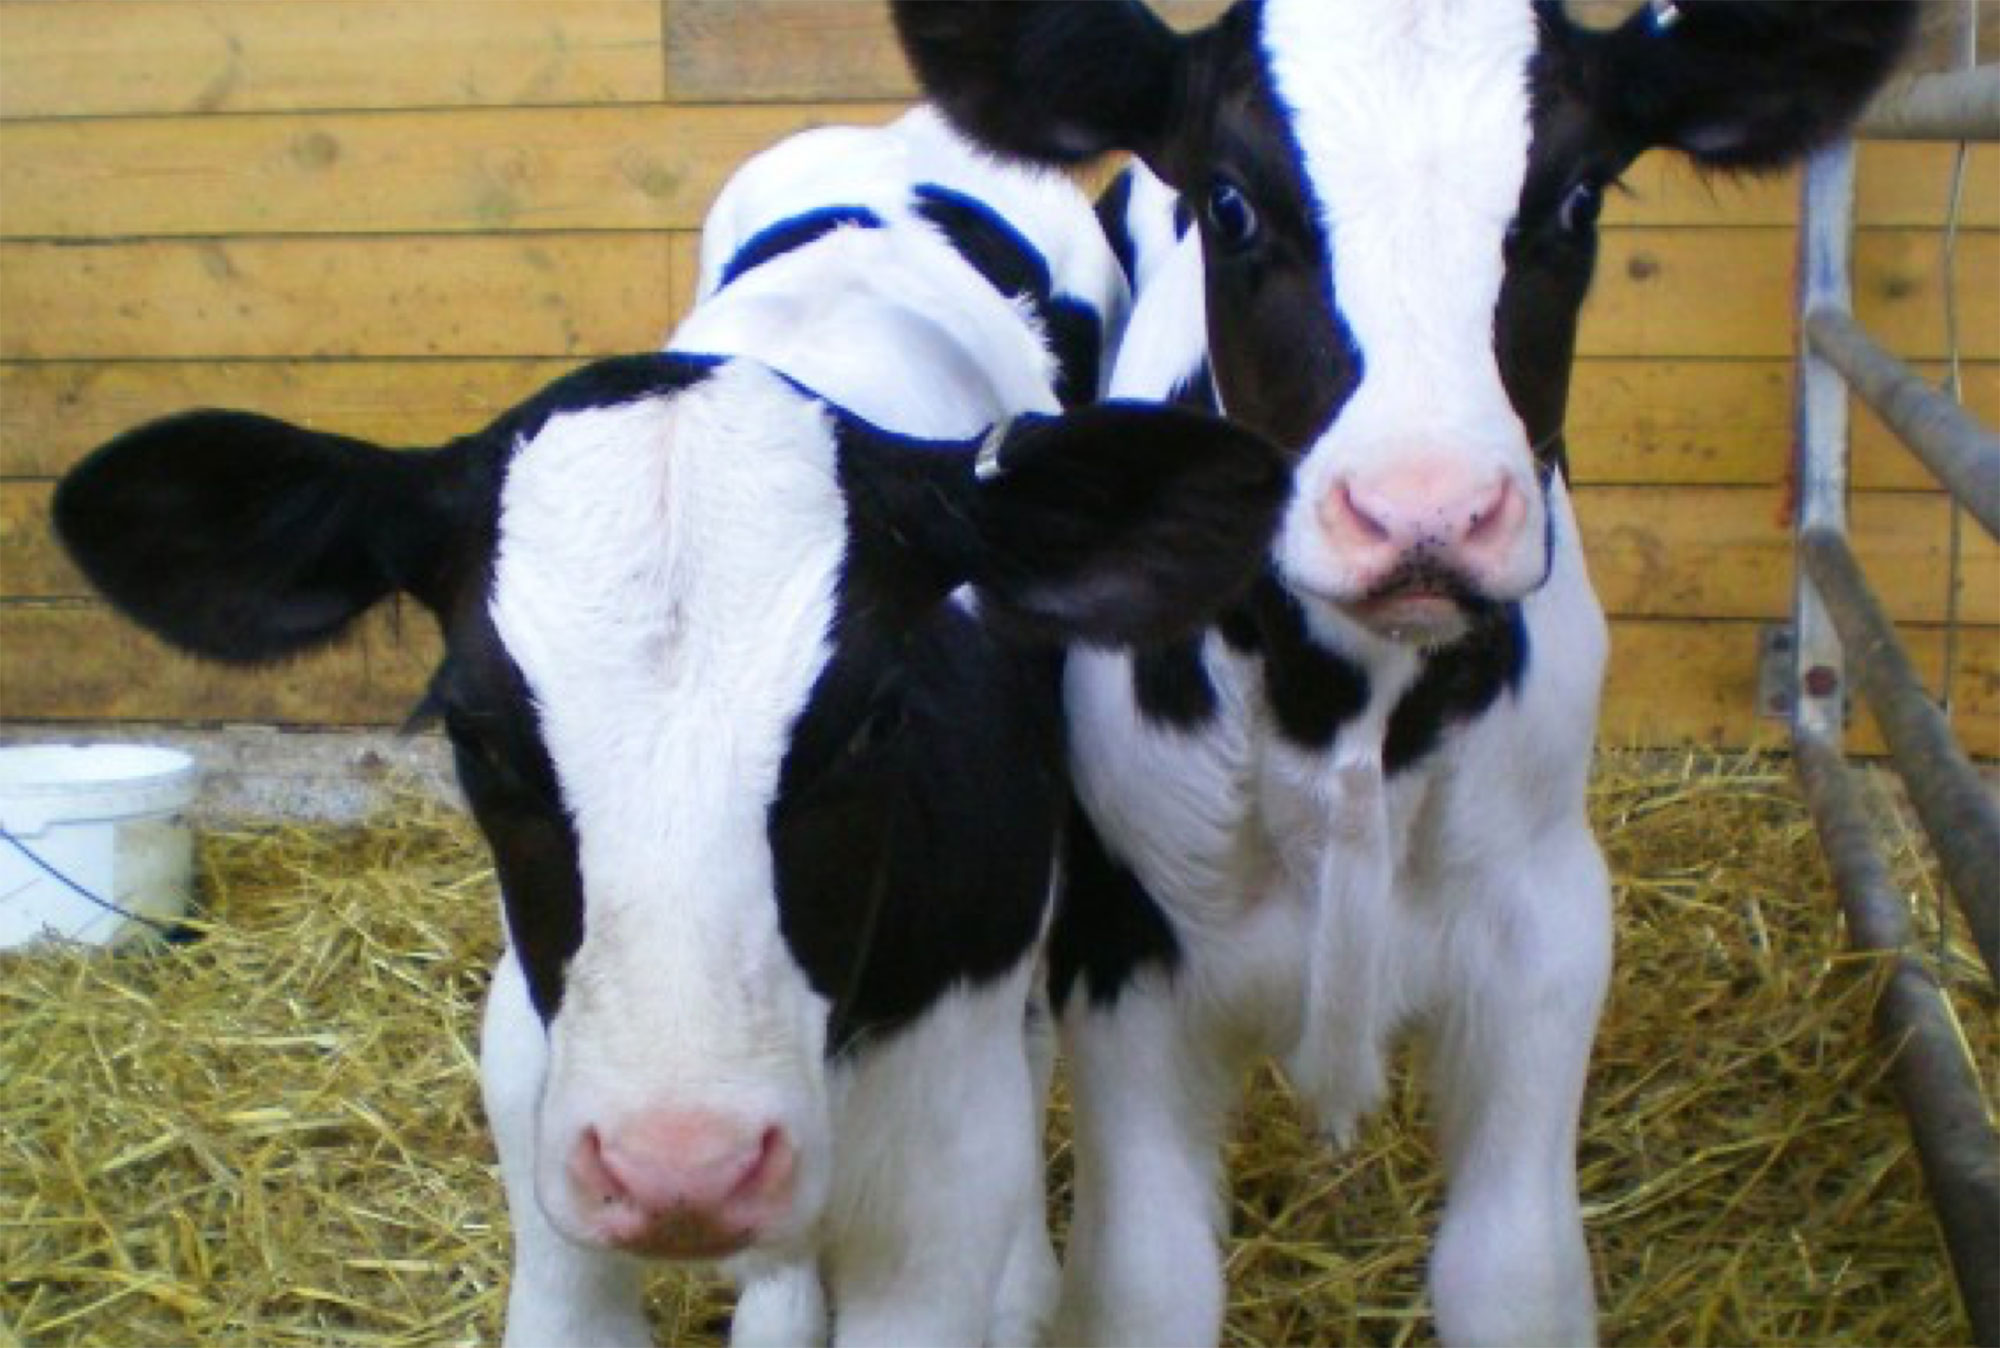 Problems with Pneumonia in young calves